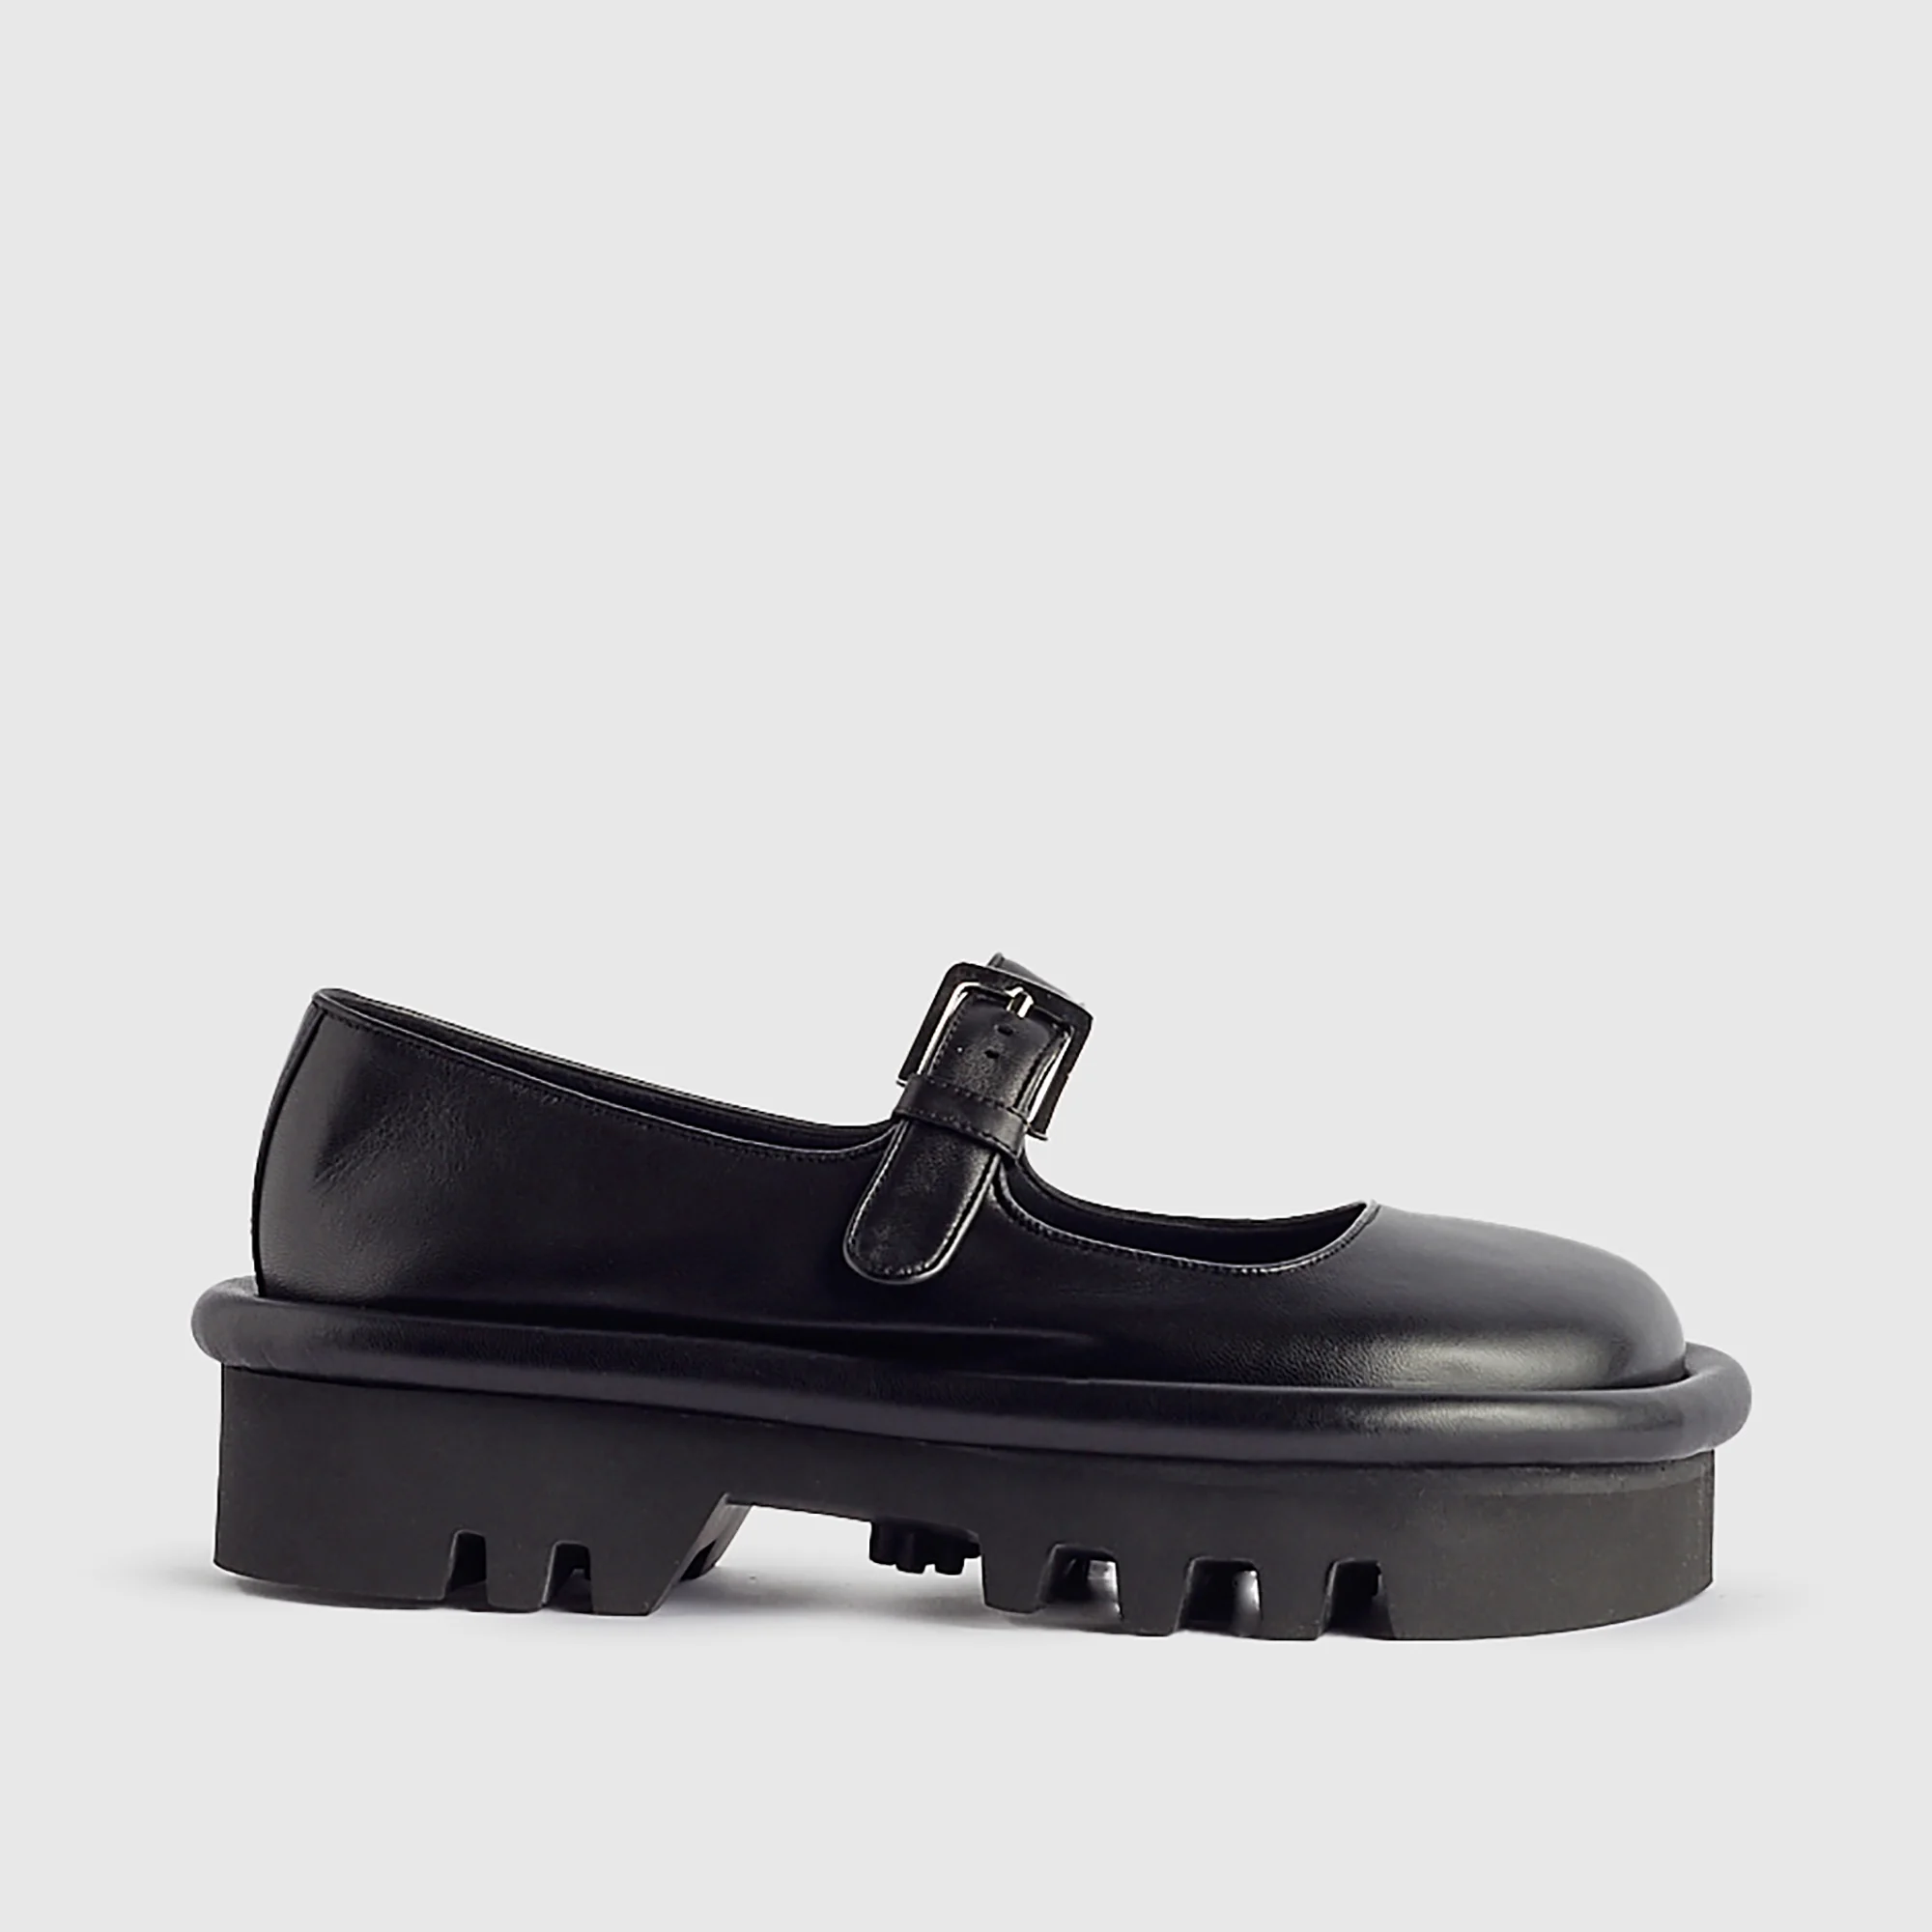 JW Anderson Women’s Bumper Leather Mary Jane Flats Image 1